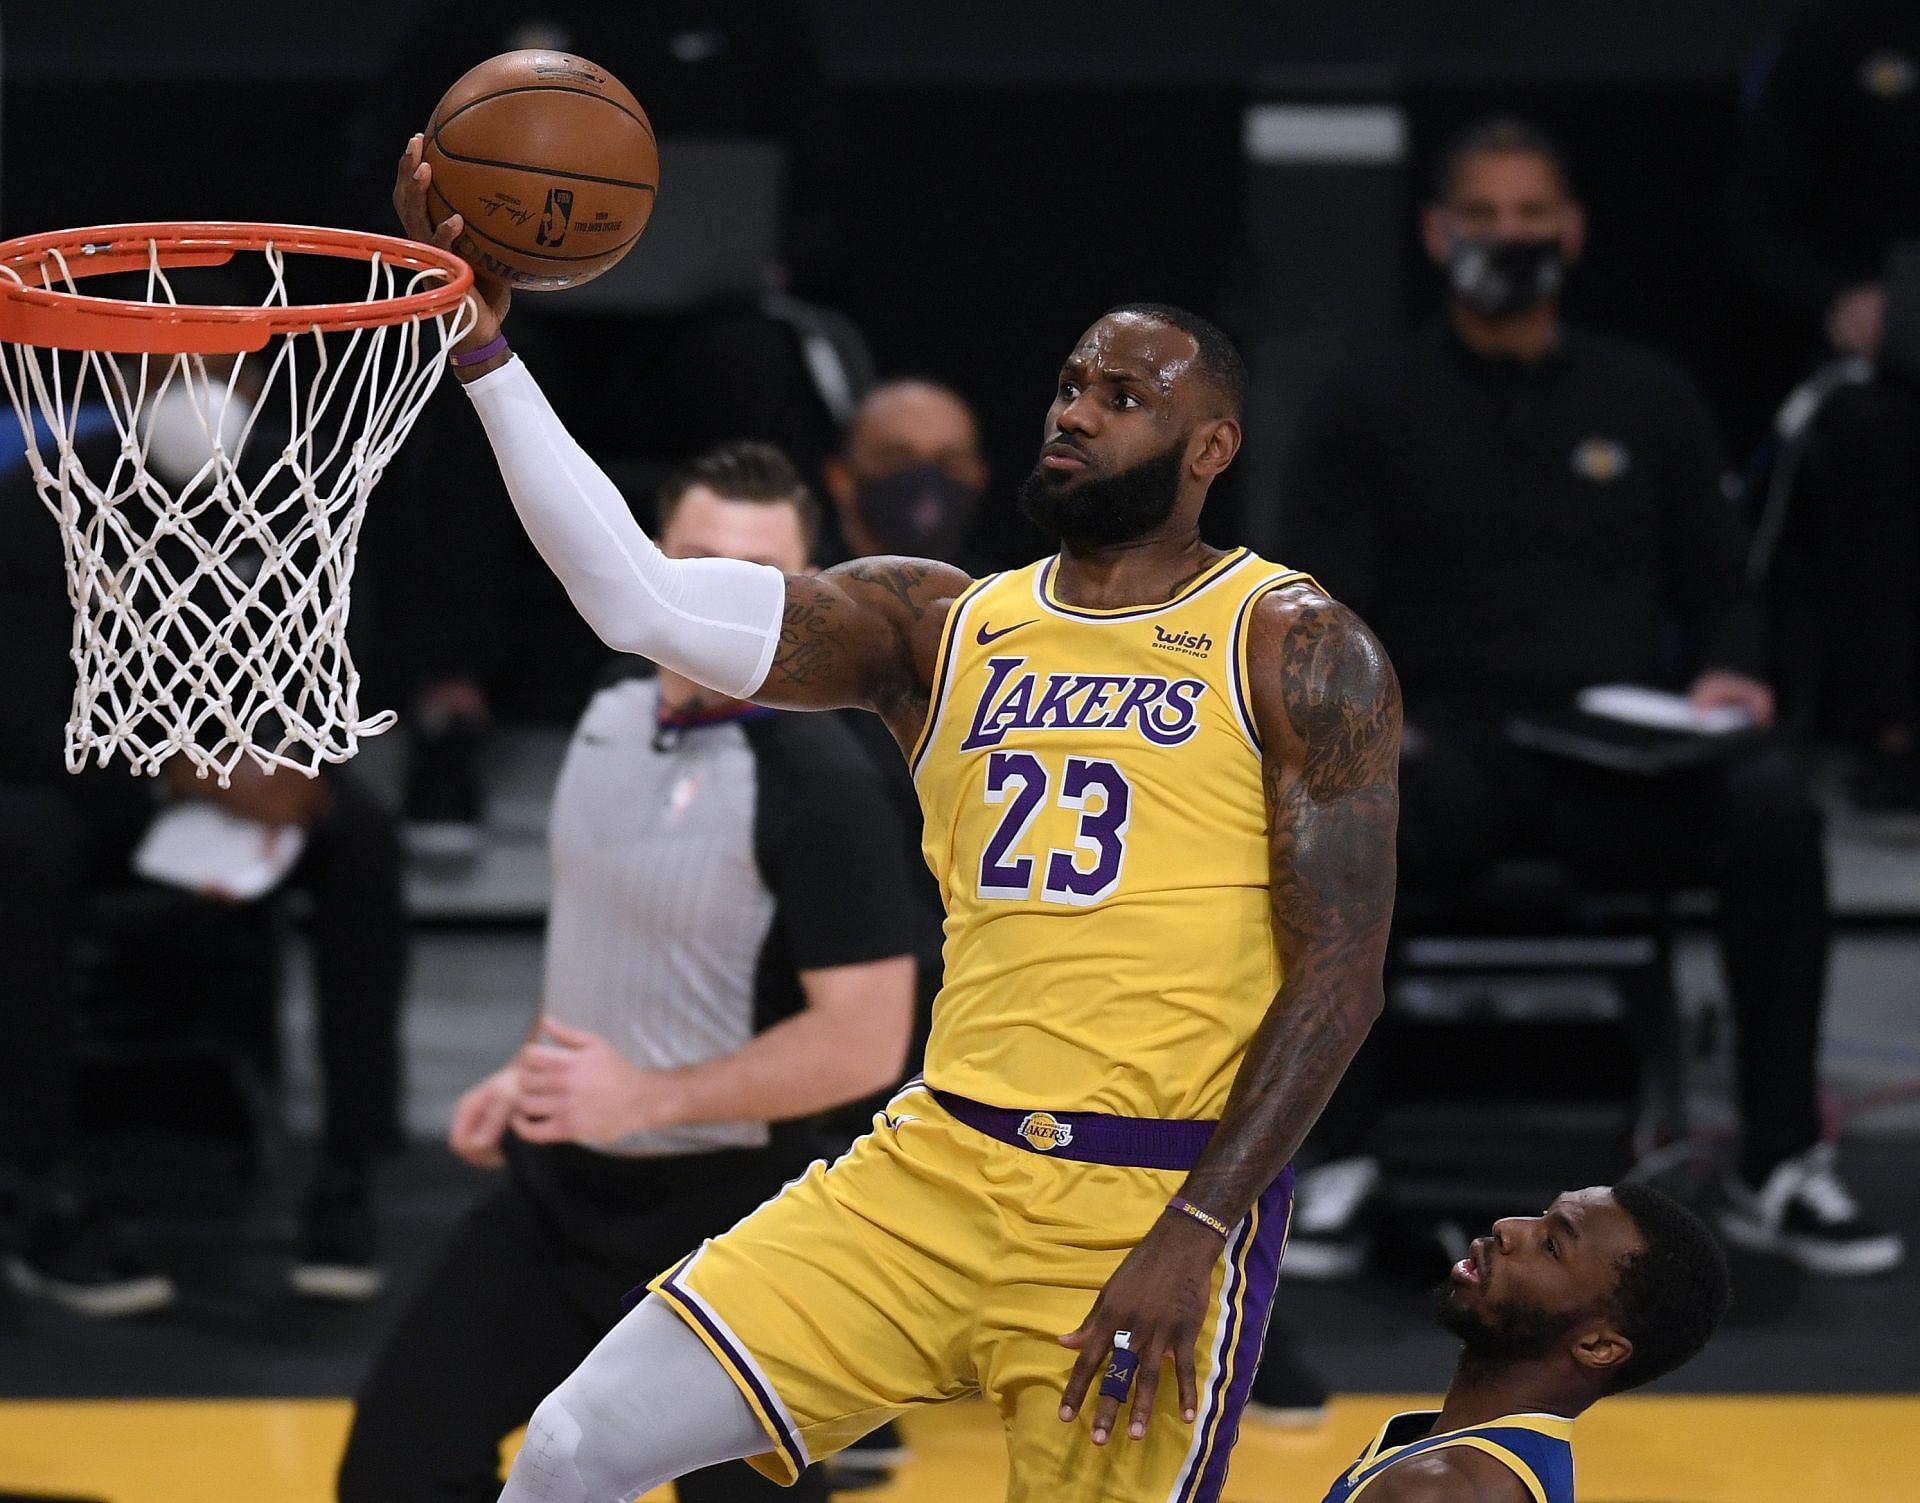 The LA Lakers and LeBron James have their work cut out for them this season [Photo: Orange Country Register]